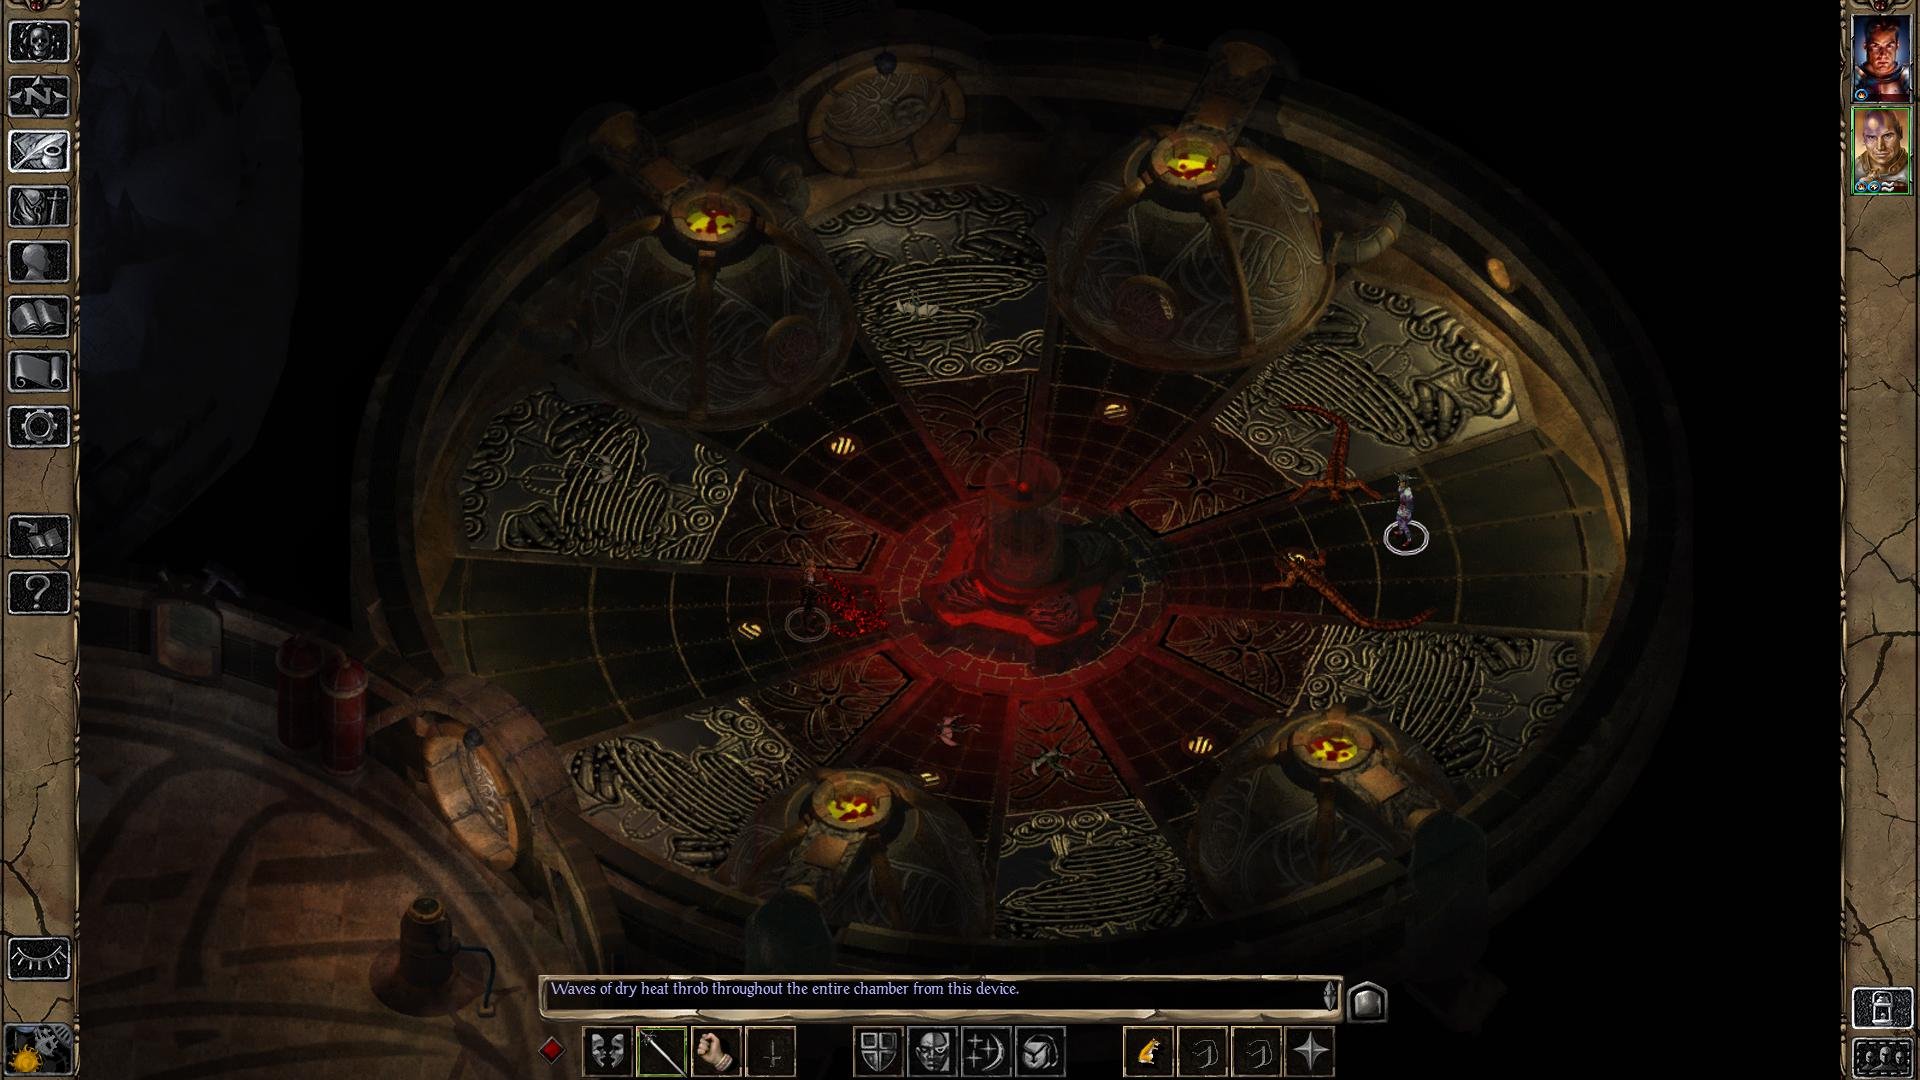 Baldur's Gate 2: Enhanced Edition has finally rolled a critical hit and popped up on the App Store for iPad